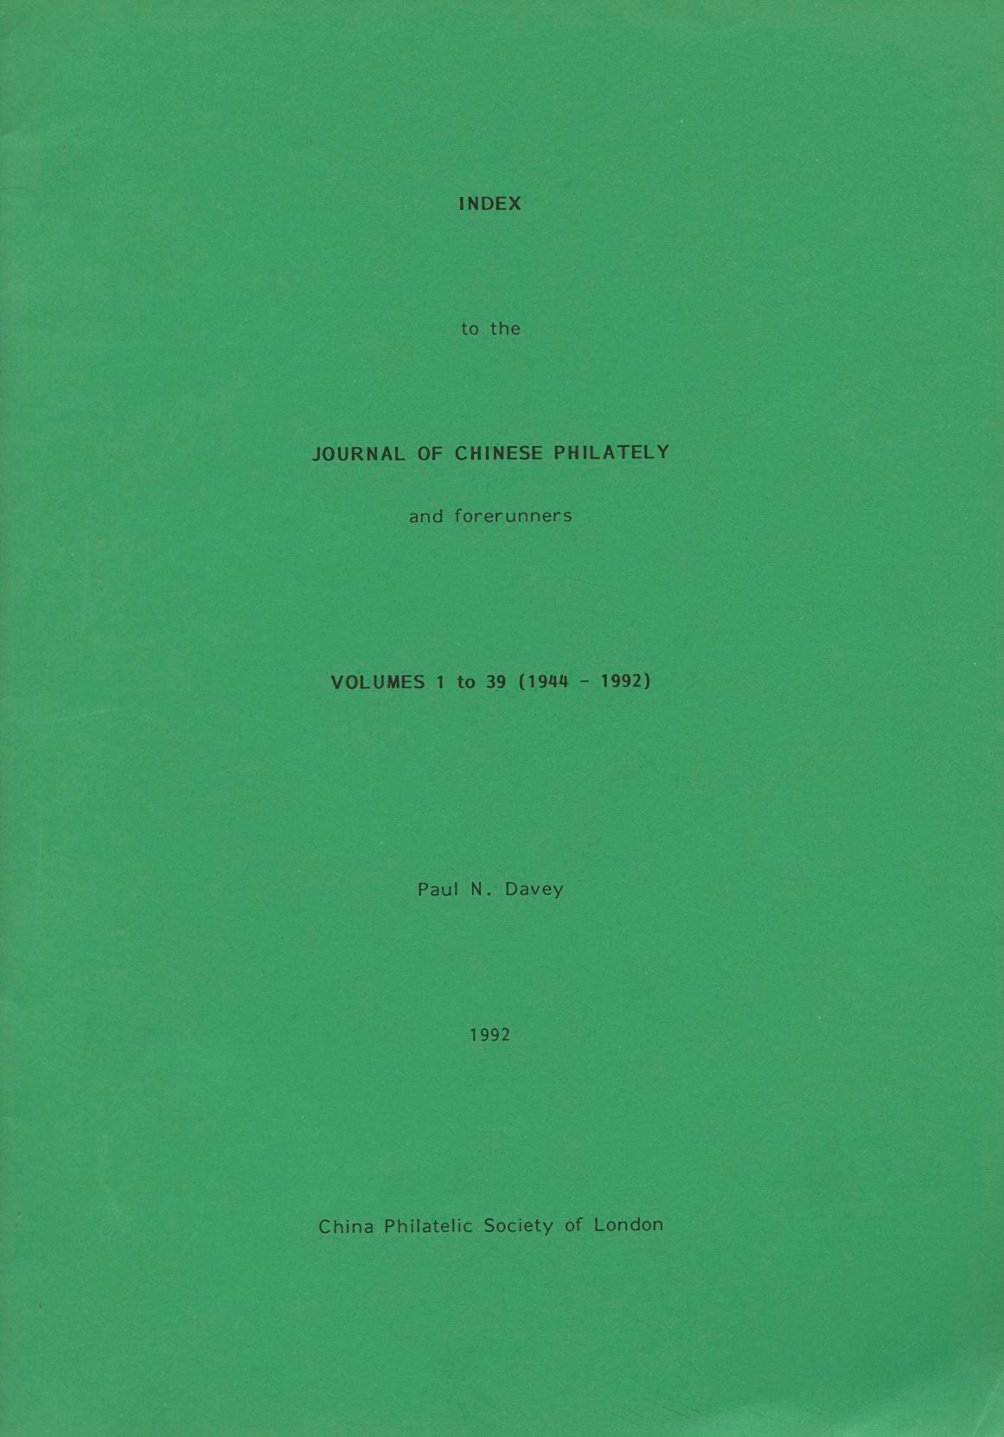 Index to the Journal of Chinese Philately (and forerunners) Volumes 1 to 39 (1944-1992), by Paul N. Davey, 1992, 50 pages, B/W, softbound (7 oz)